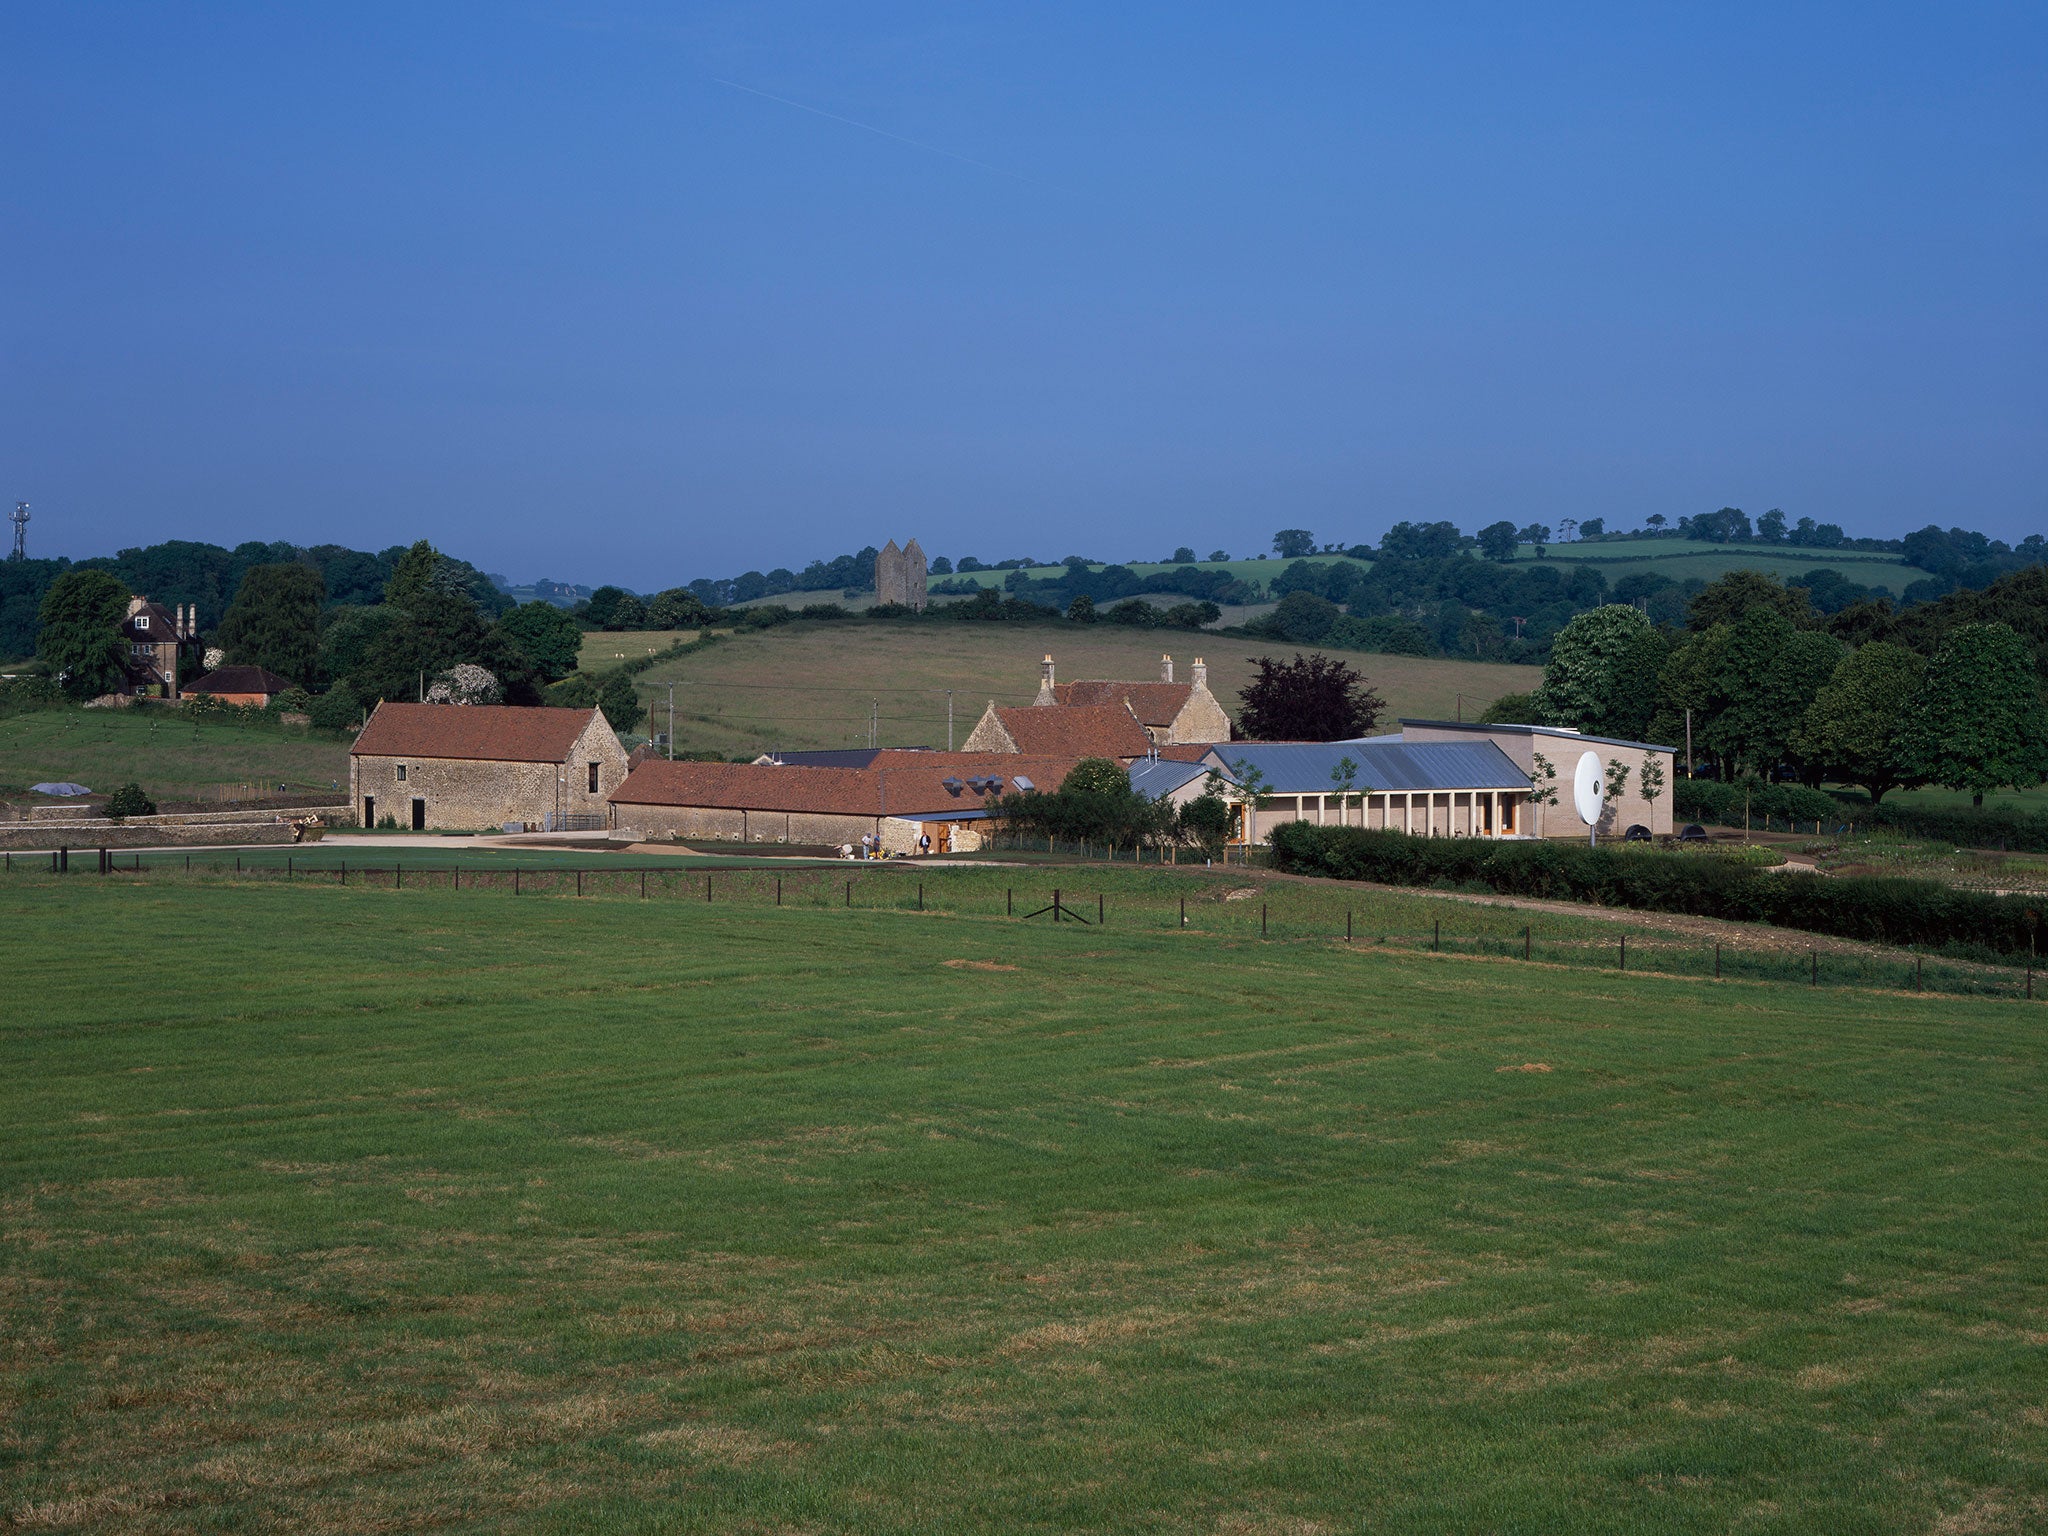 Landscape with rustic art gallery: Durslade Farm, Bruton, converted by Hauser & Wirth